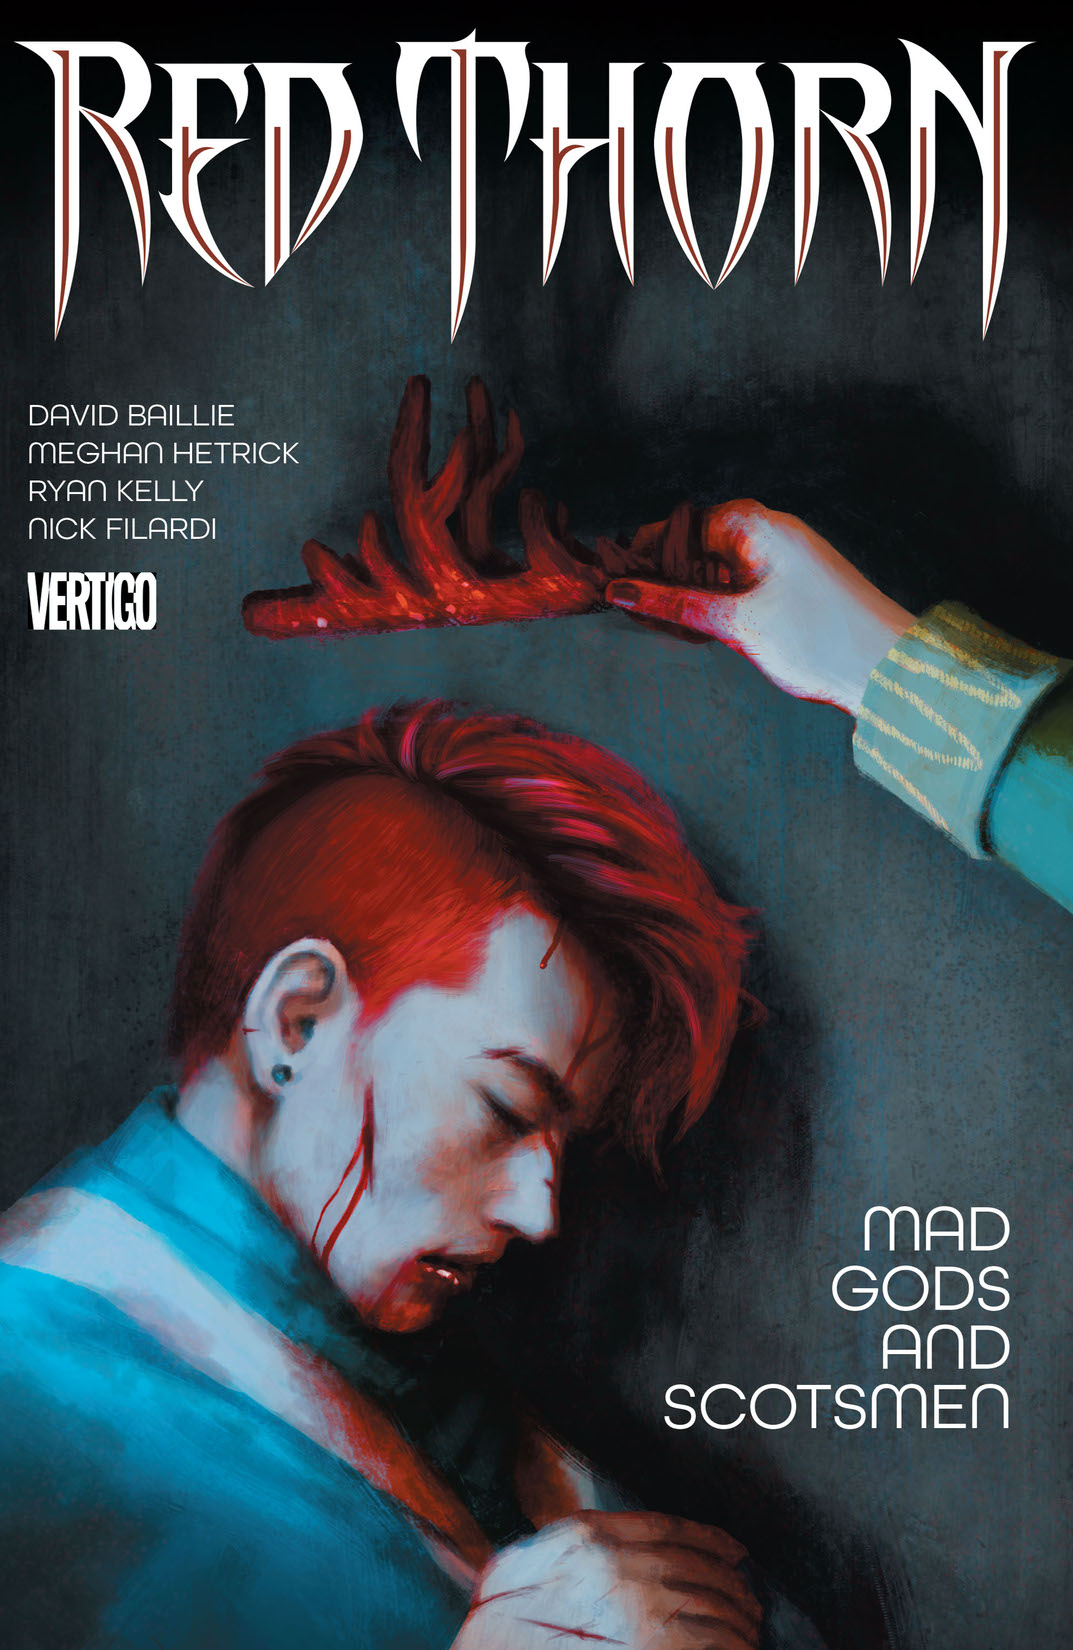 Red Thorn Vol. 2: Mad Gods and Scotsmen preview images